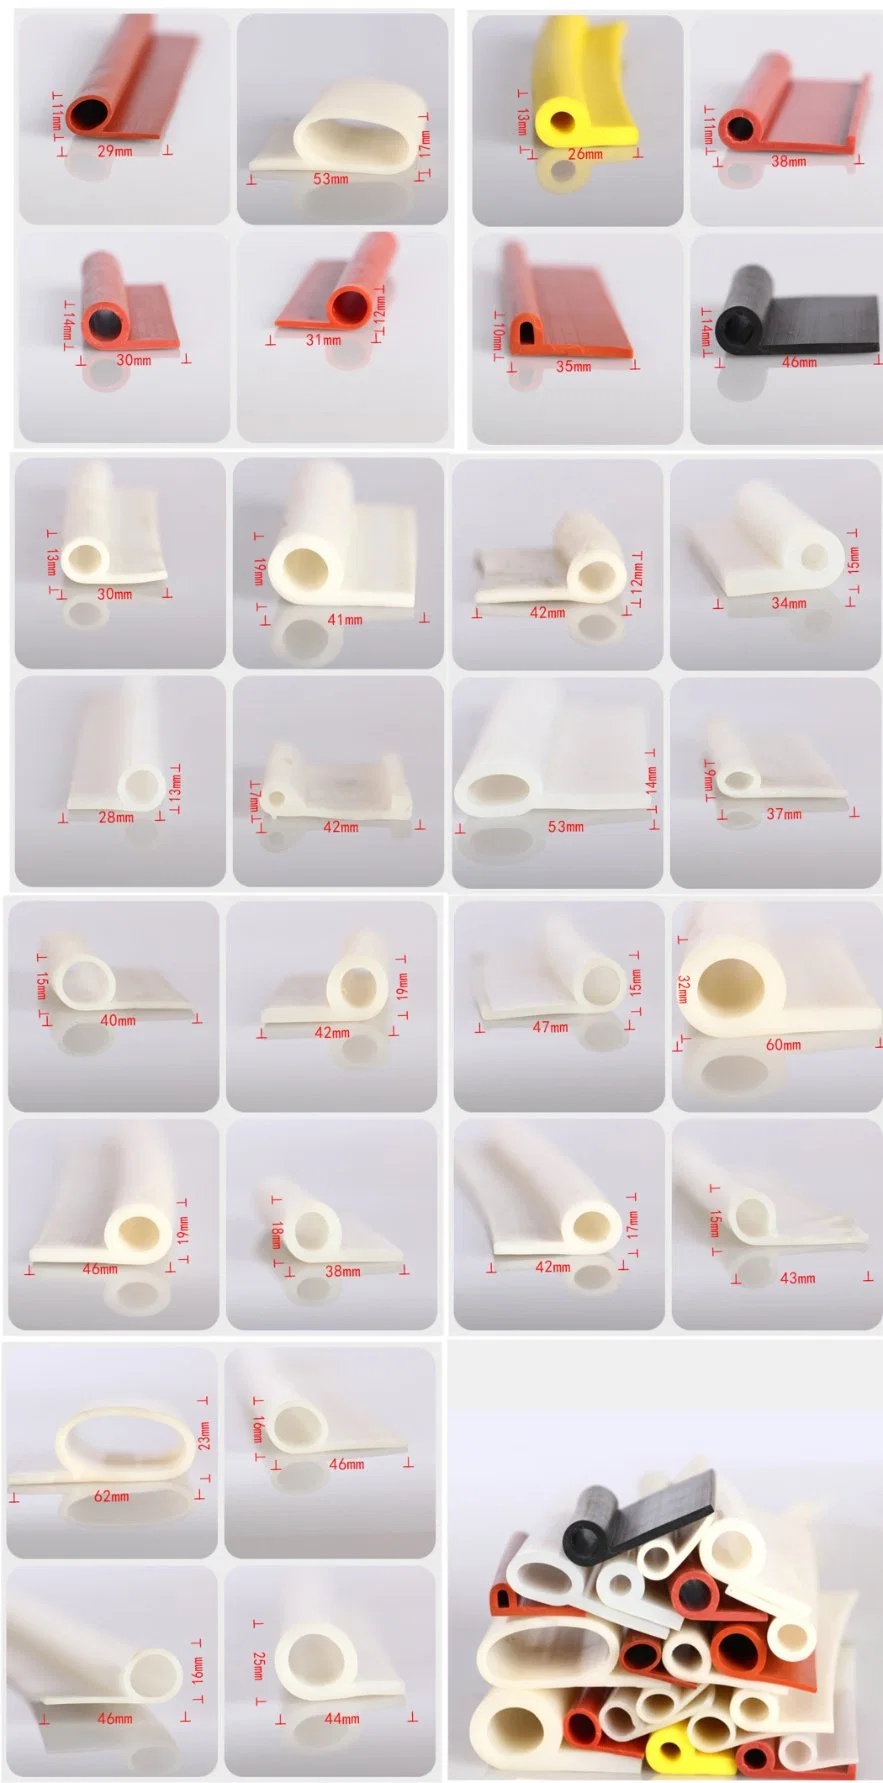 Customized E-Shape Silicone Rubber Sealing Strips by Chinese Quality Product Manufacturers